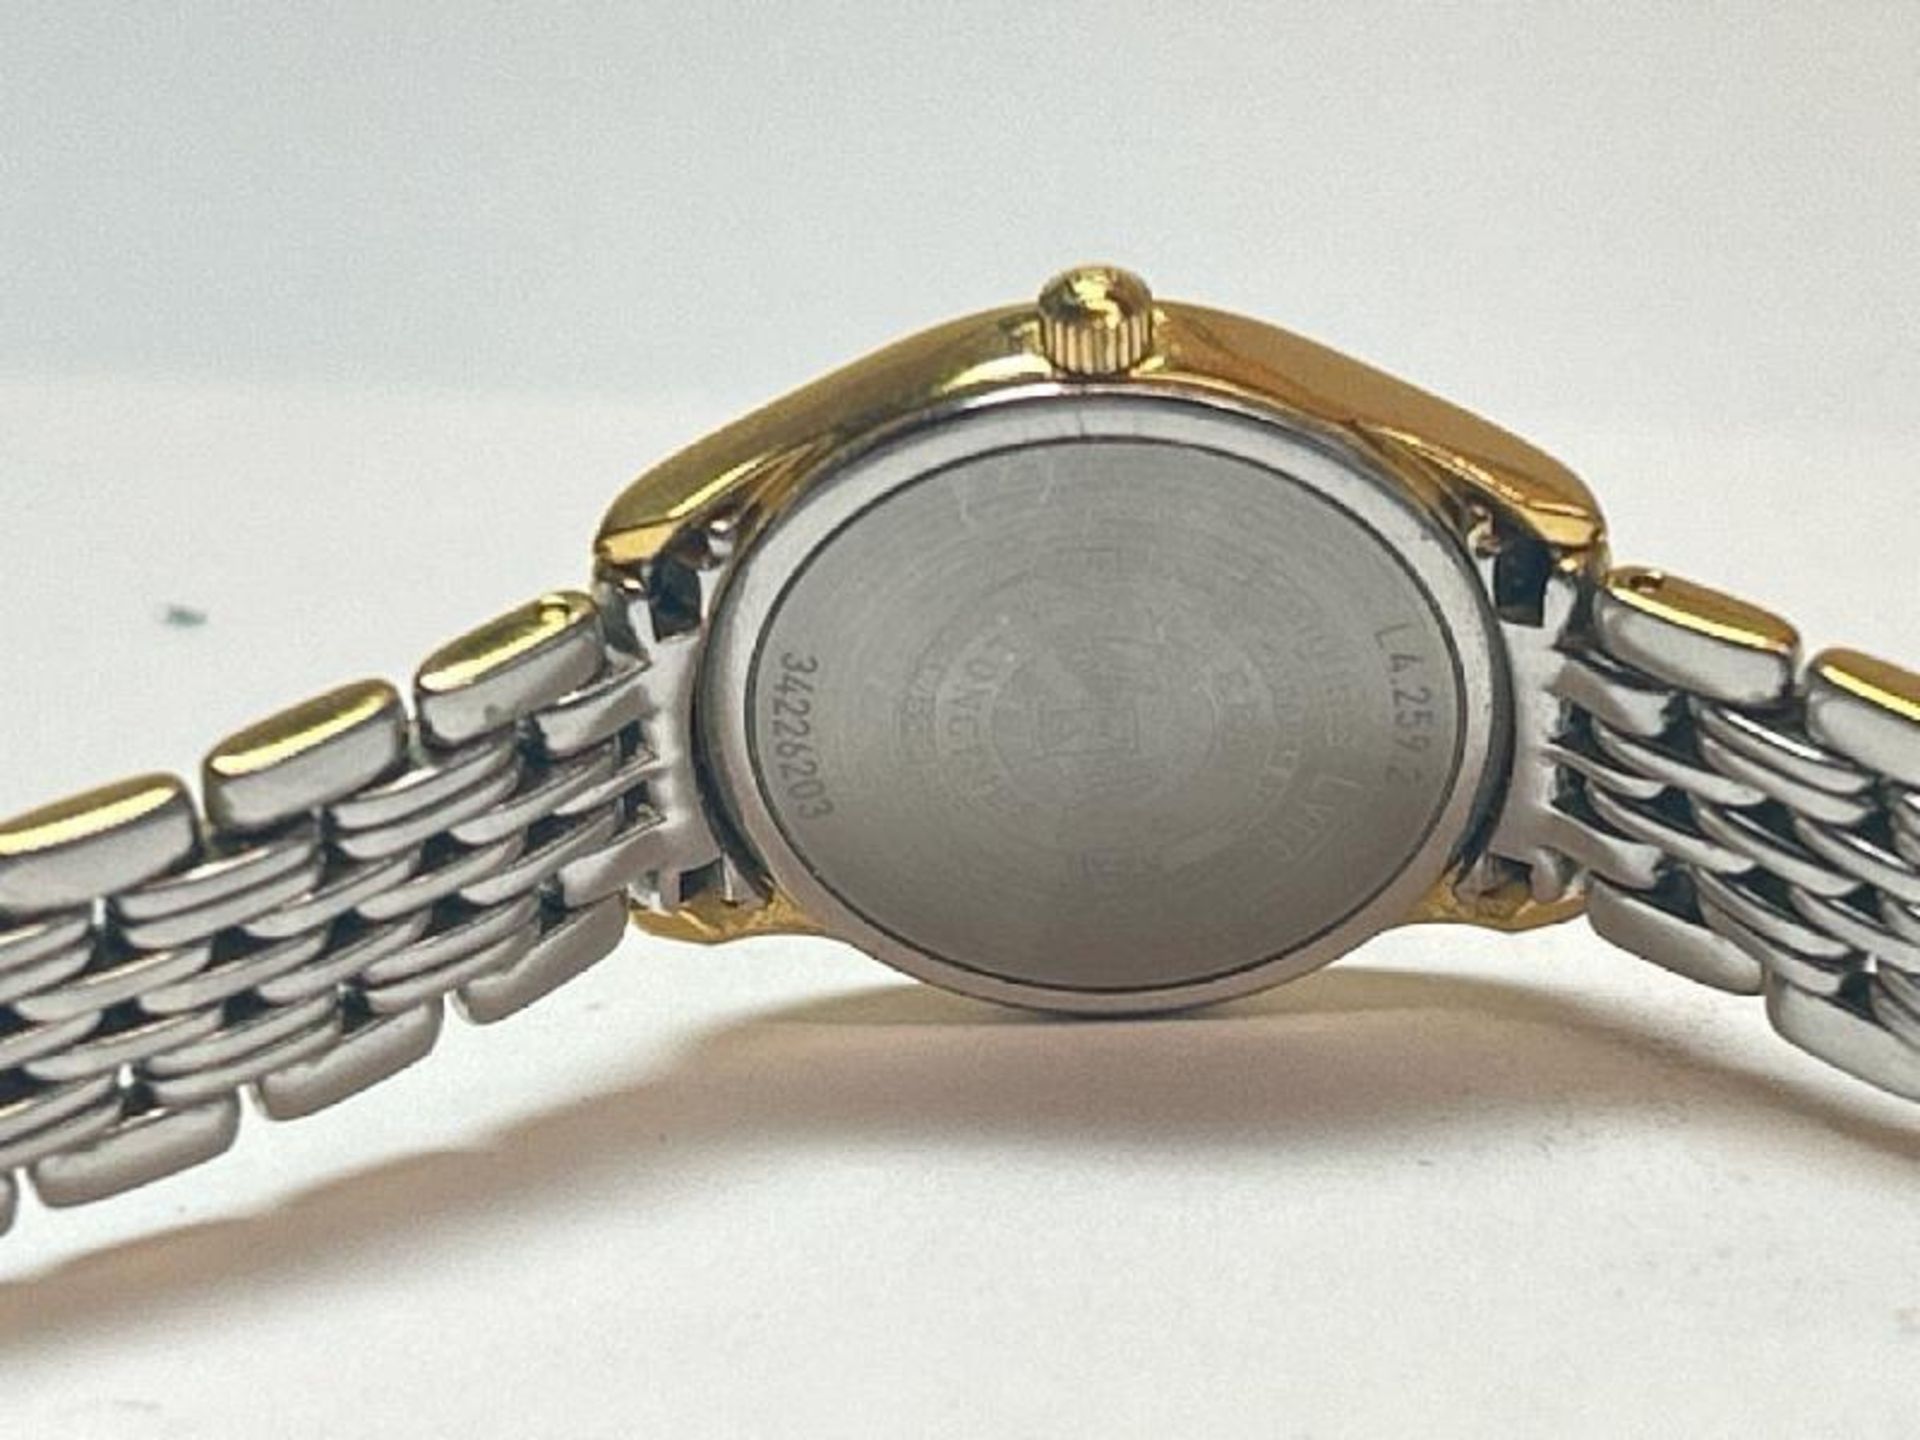 Longines Lyre stainless steel ladies bracelet watch model L4 259 2, with box / SF - Image 4 of 7